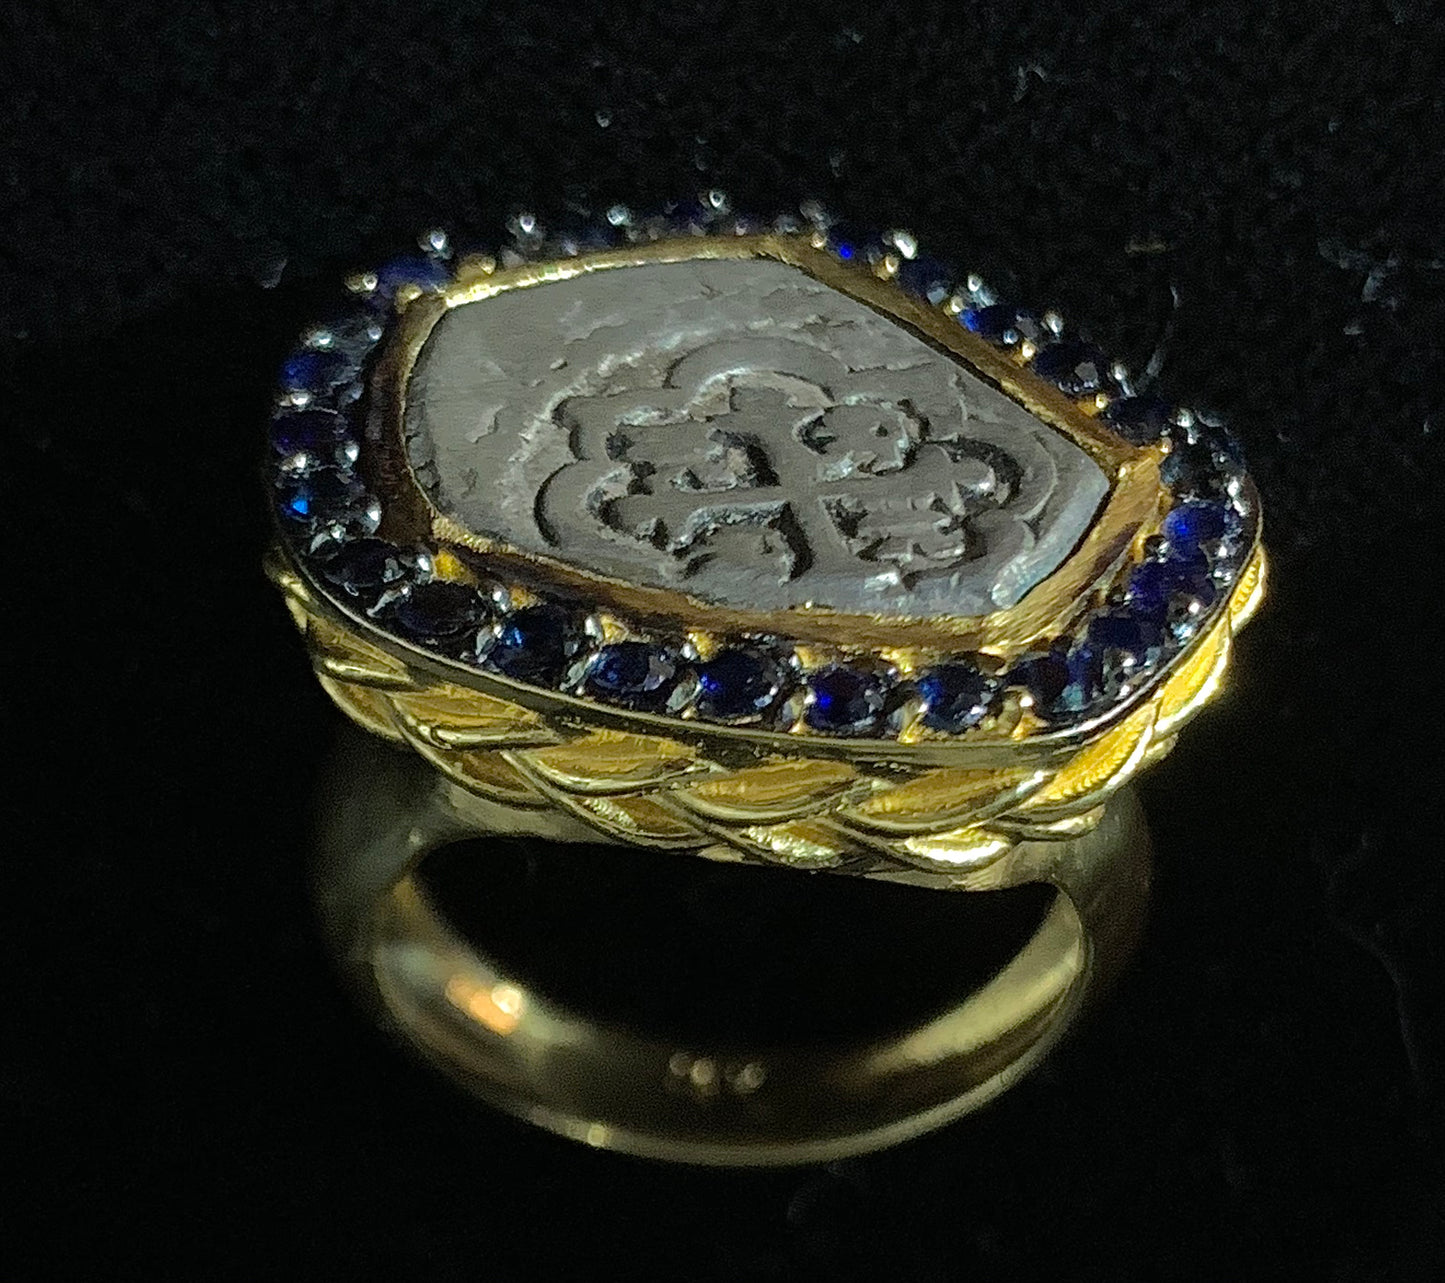 Mexico City Coin With Halo of Sapphires